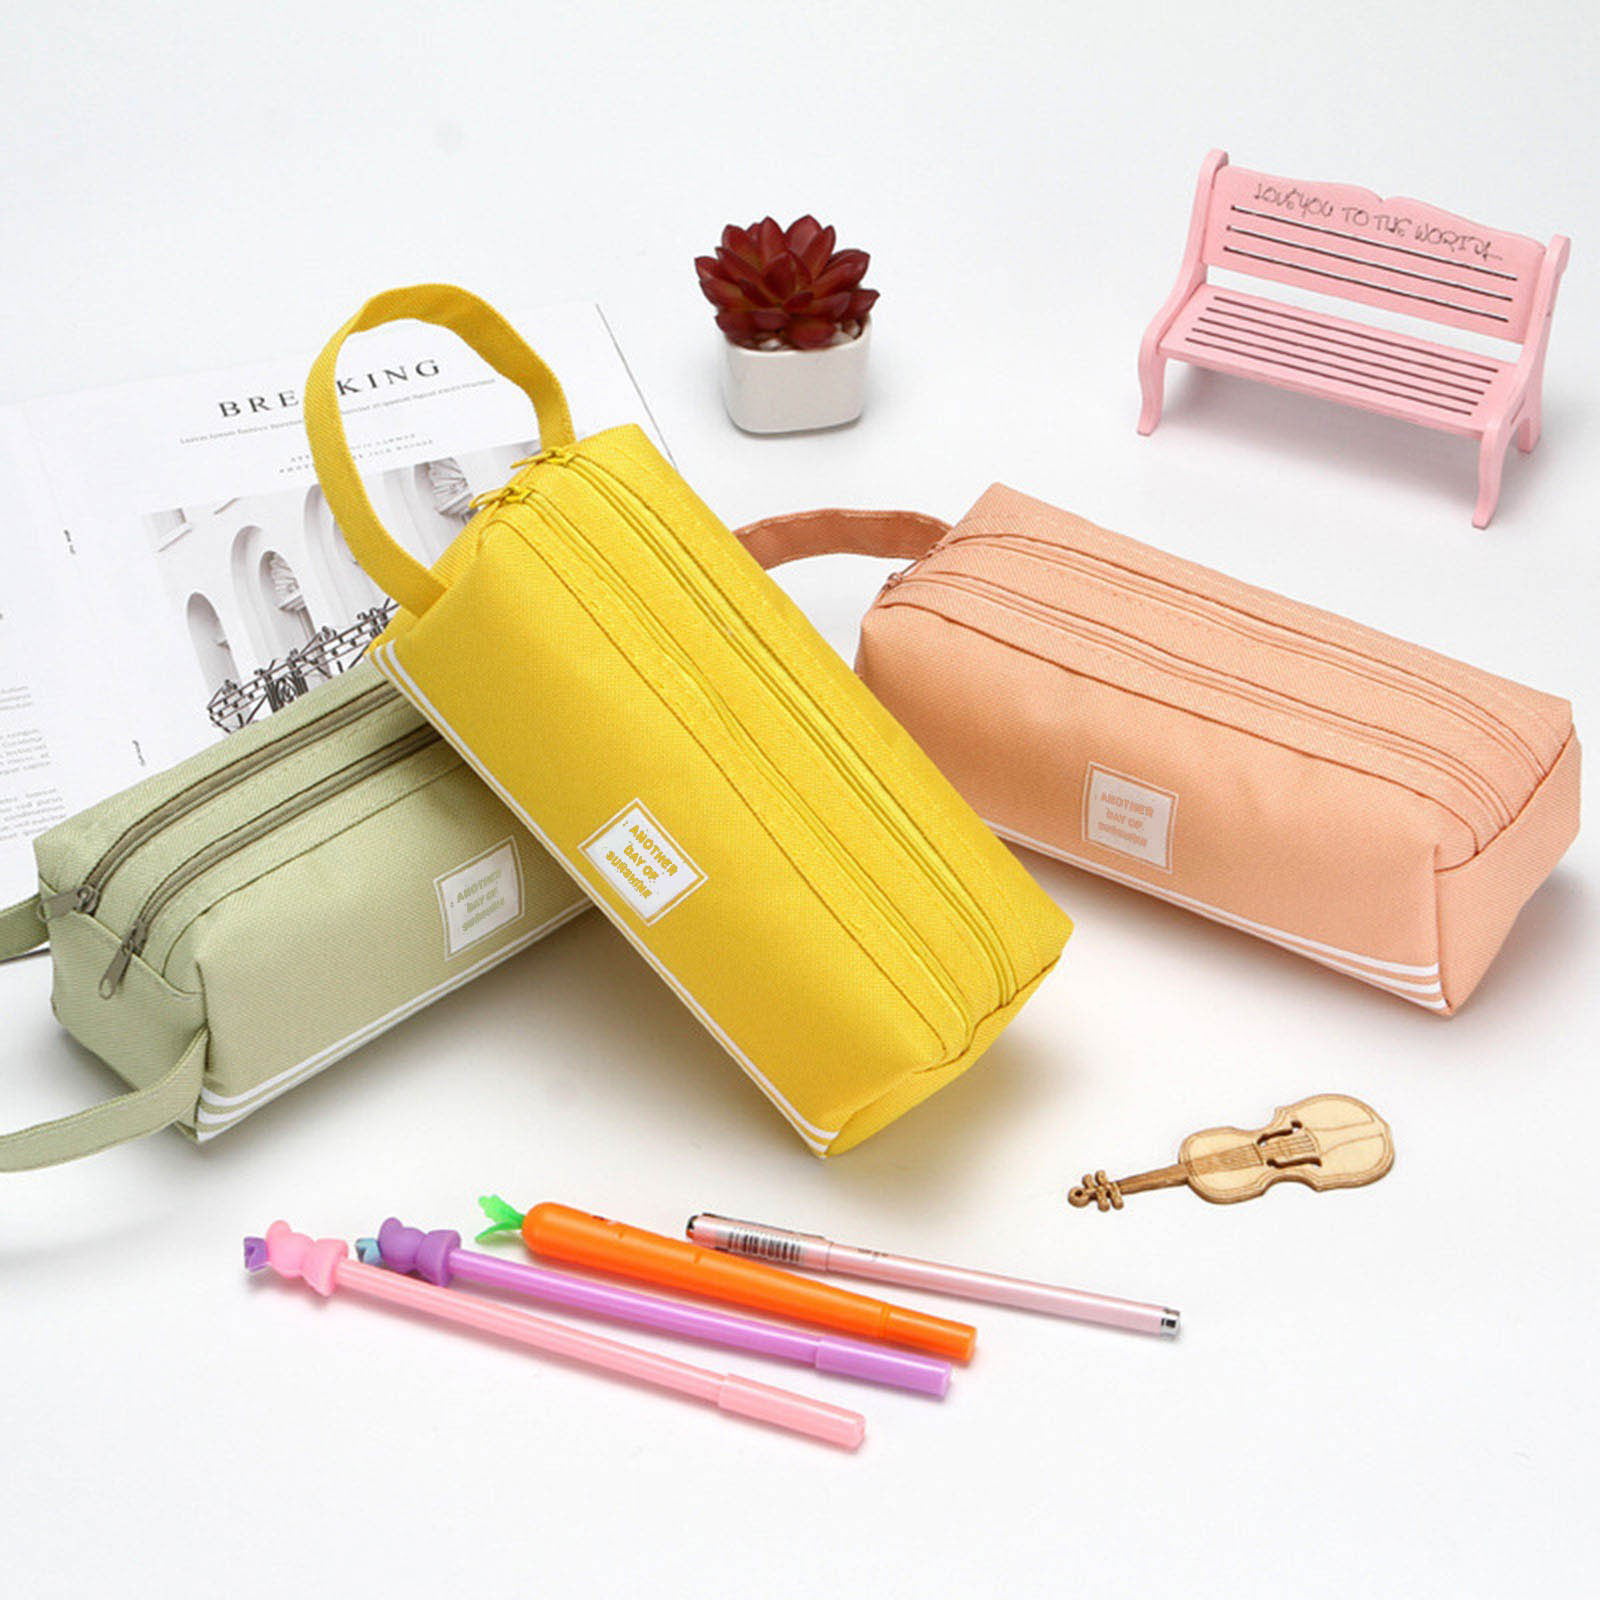 Wmkox8yii Clearancepencil Box Pen Pencil Case Pencil Bag Stationery Pencil Pouch,Translucent Pencil Case Student Storage Multifunctional Double-Sided Plastic